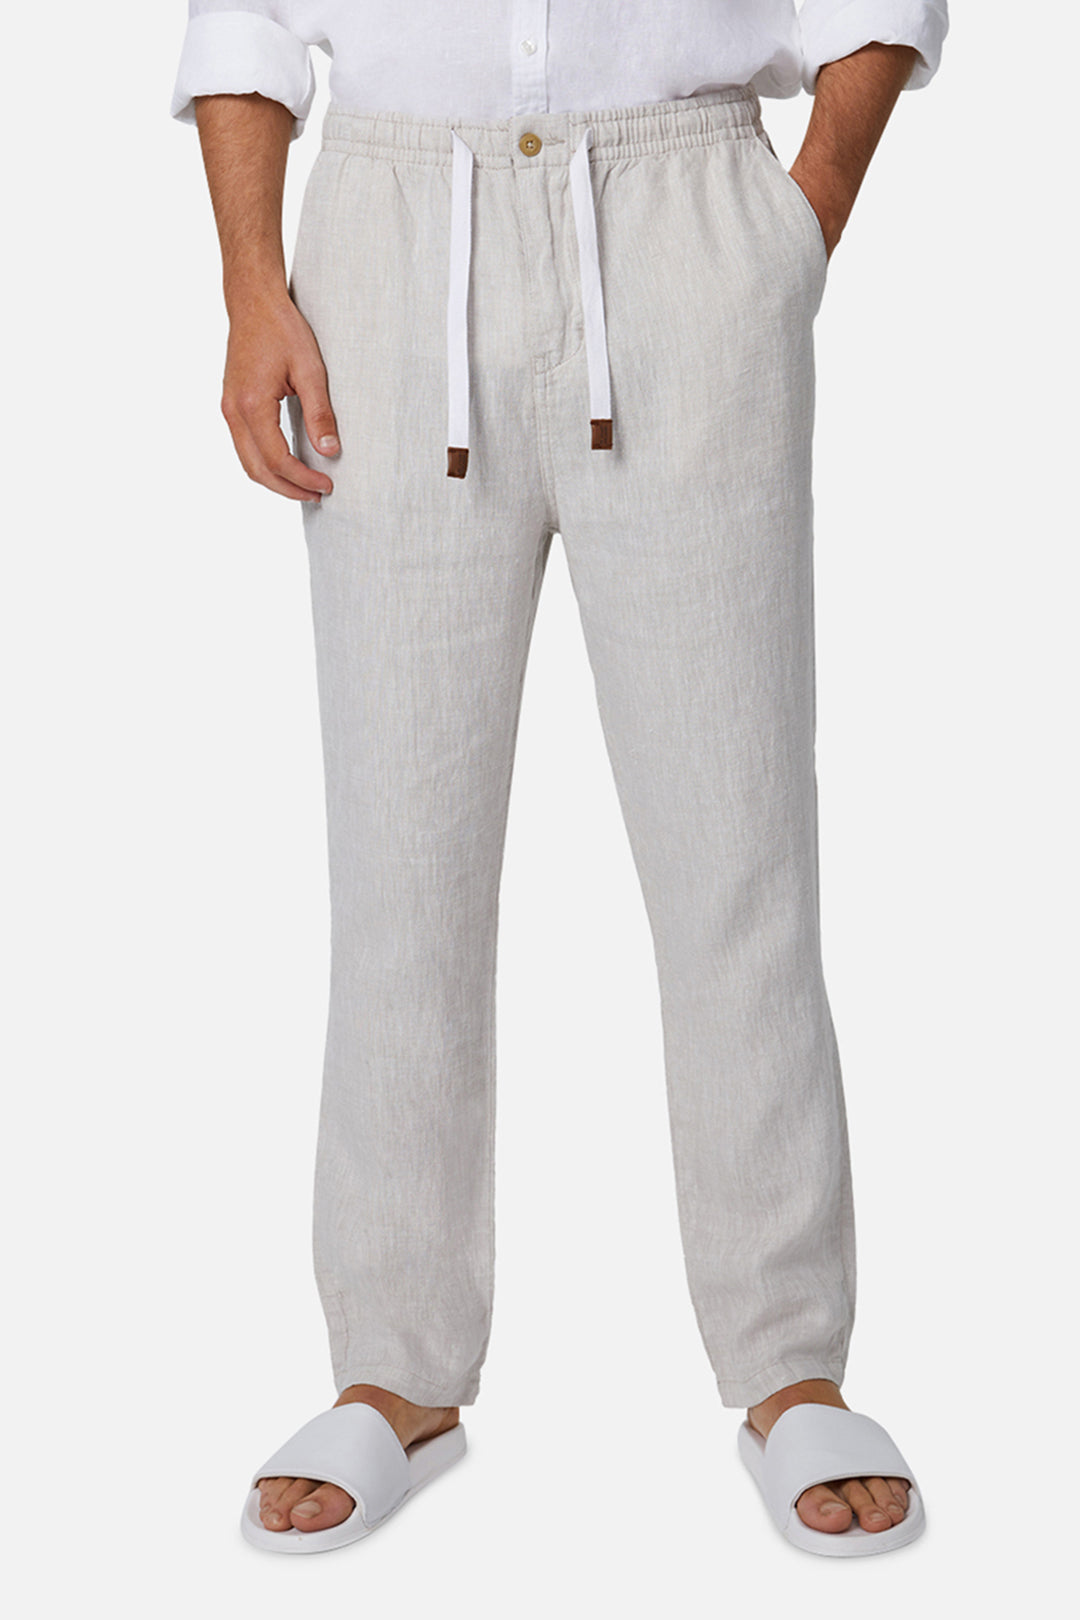 linen pants with sneakers